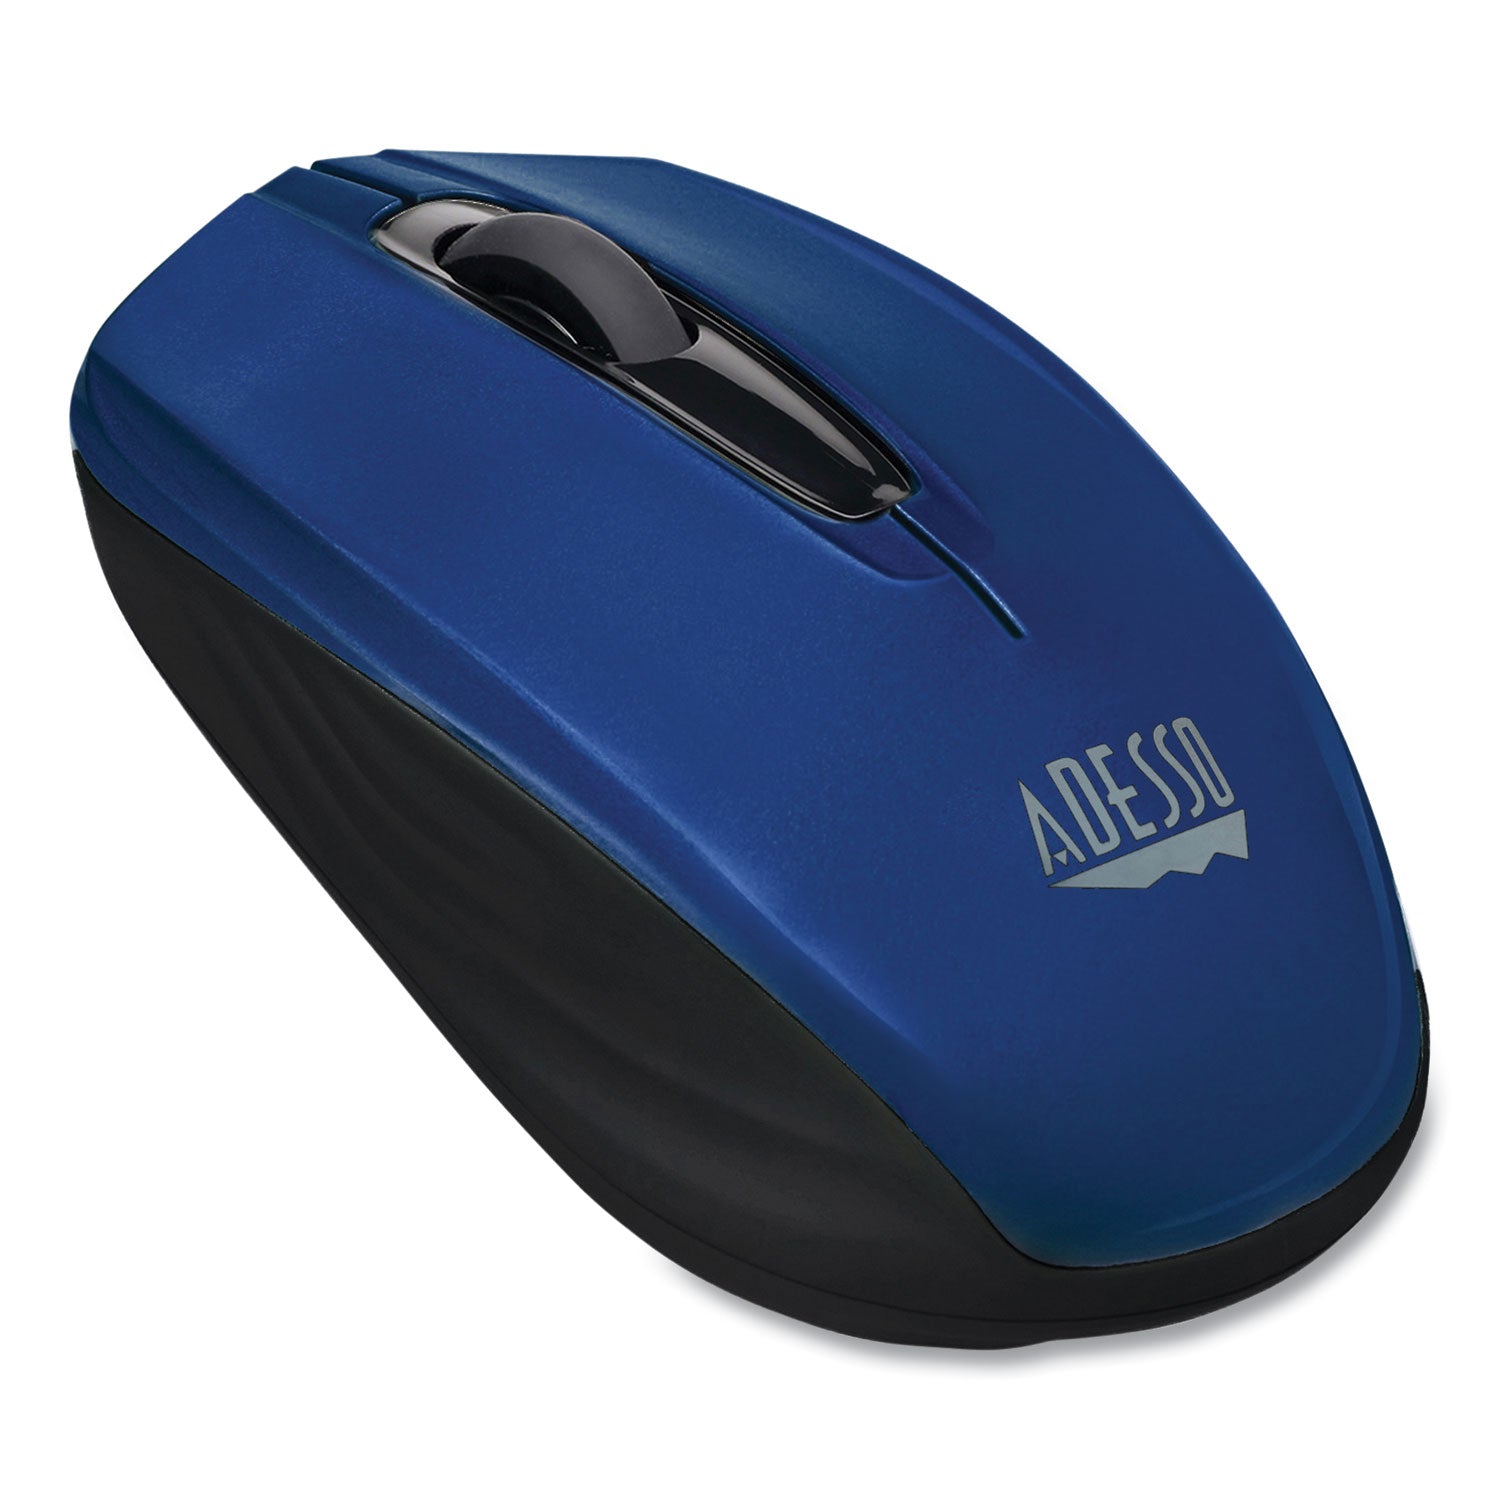 imouse-s50-wireless-mini-mouse-24-ghz-frequency-33-ft-wireless-range-left-right-hand-use-blue_adeimouses50l - 2